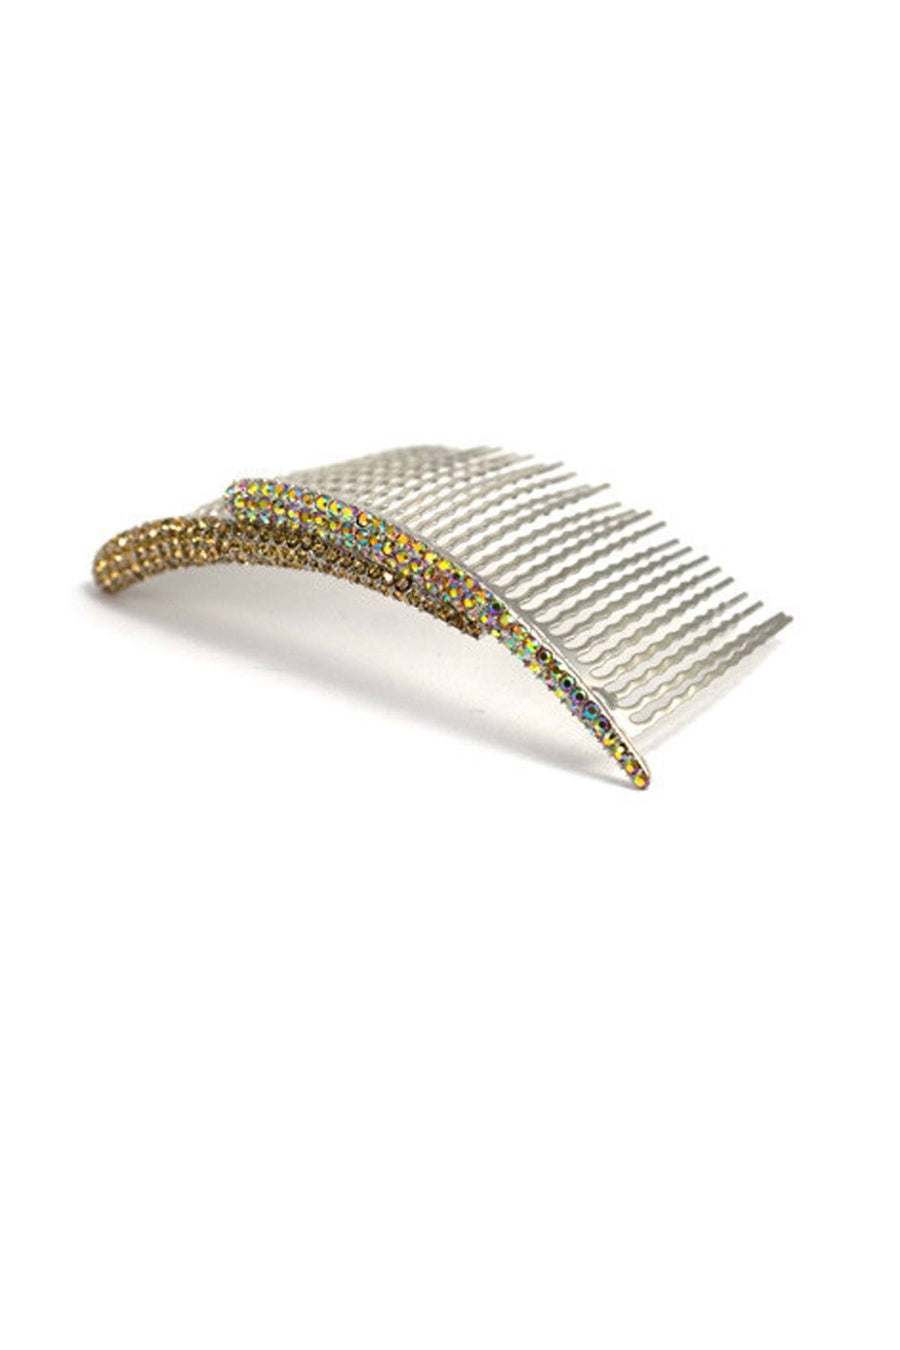 Crystal Spike Large Hair Comb -  Hair Comb, Soho Style